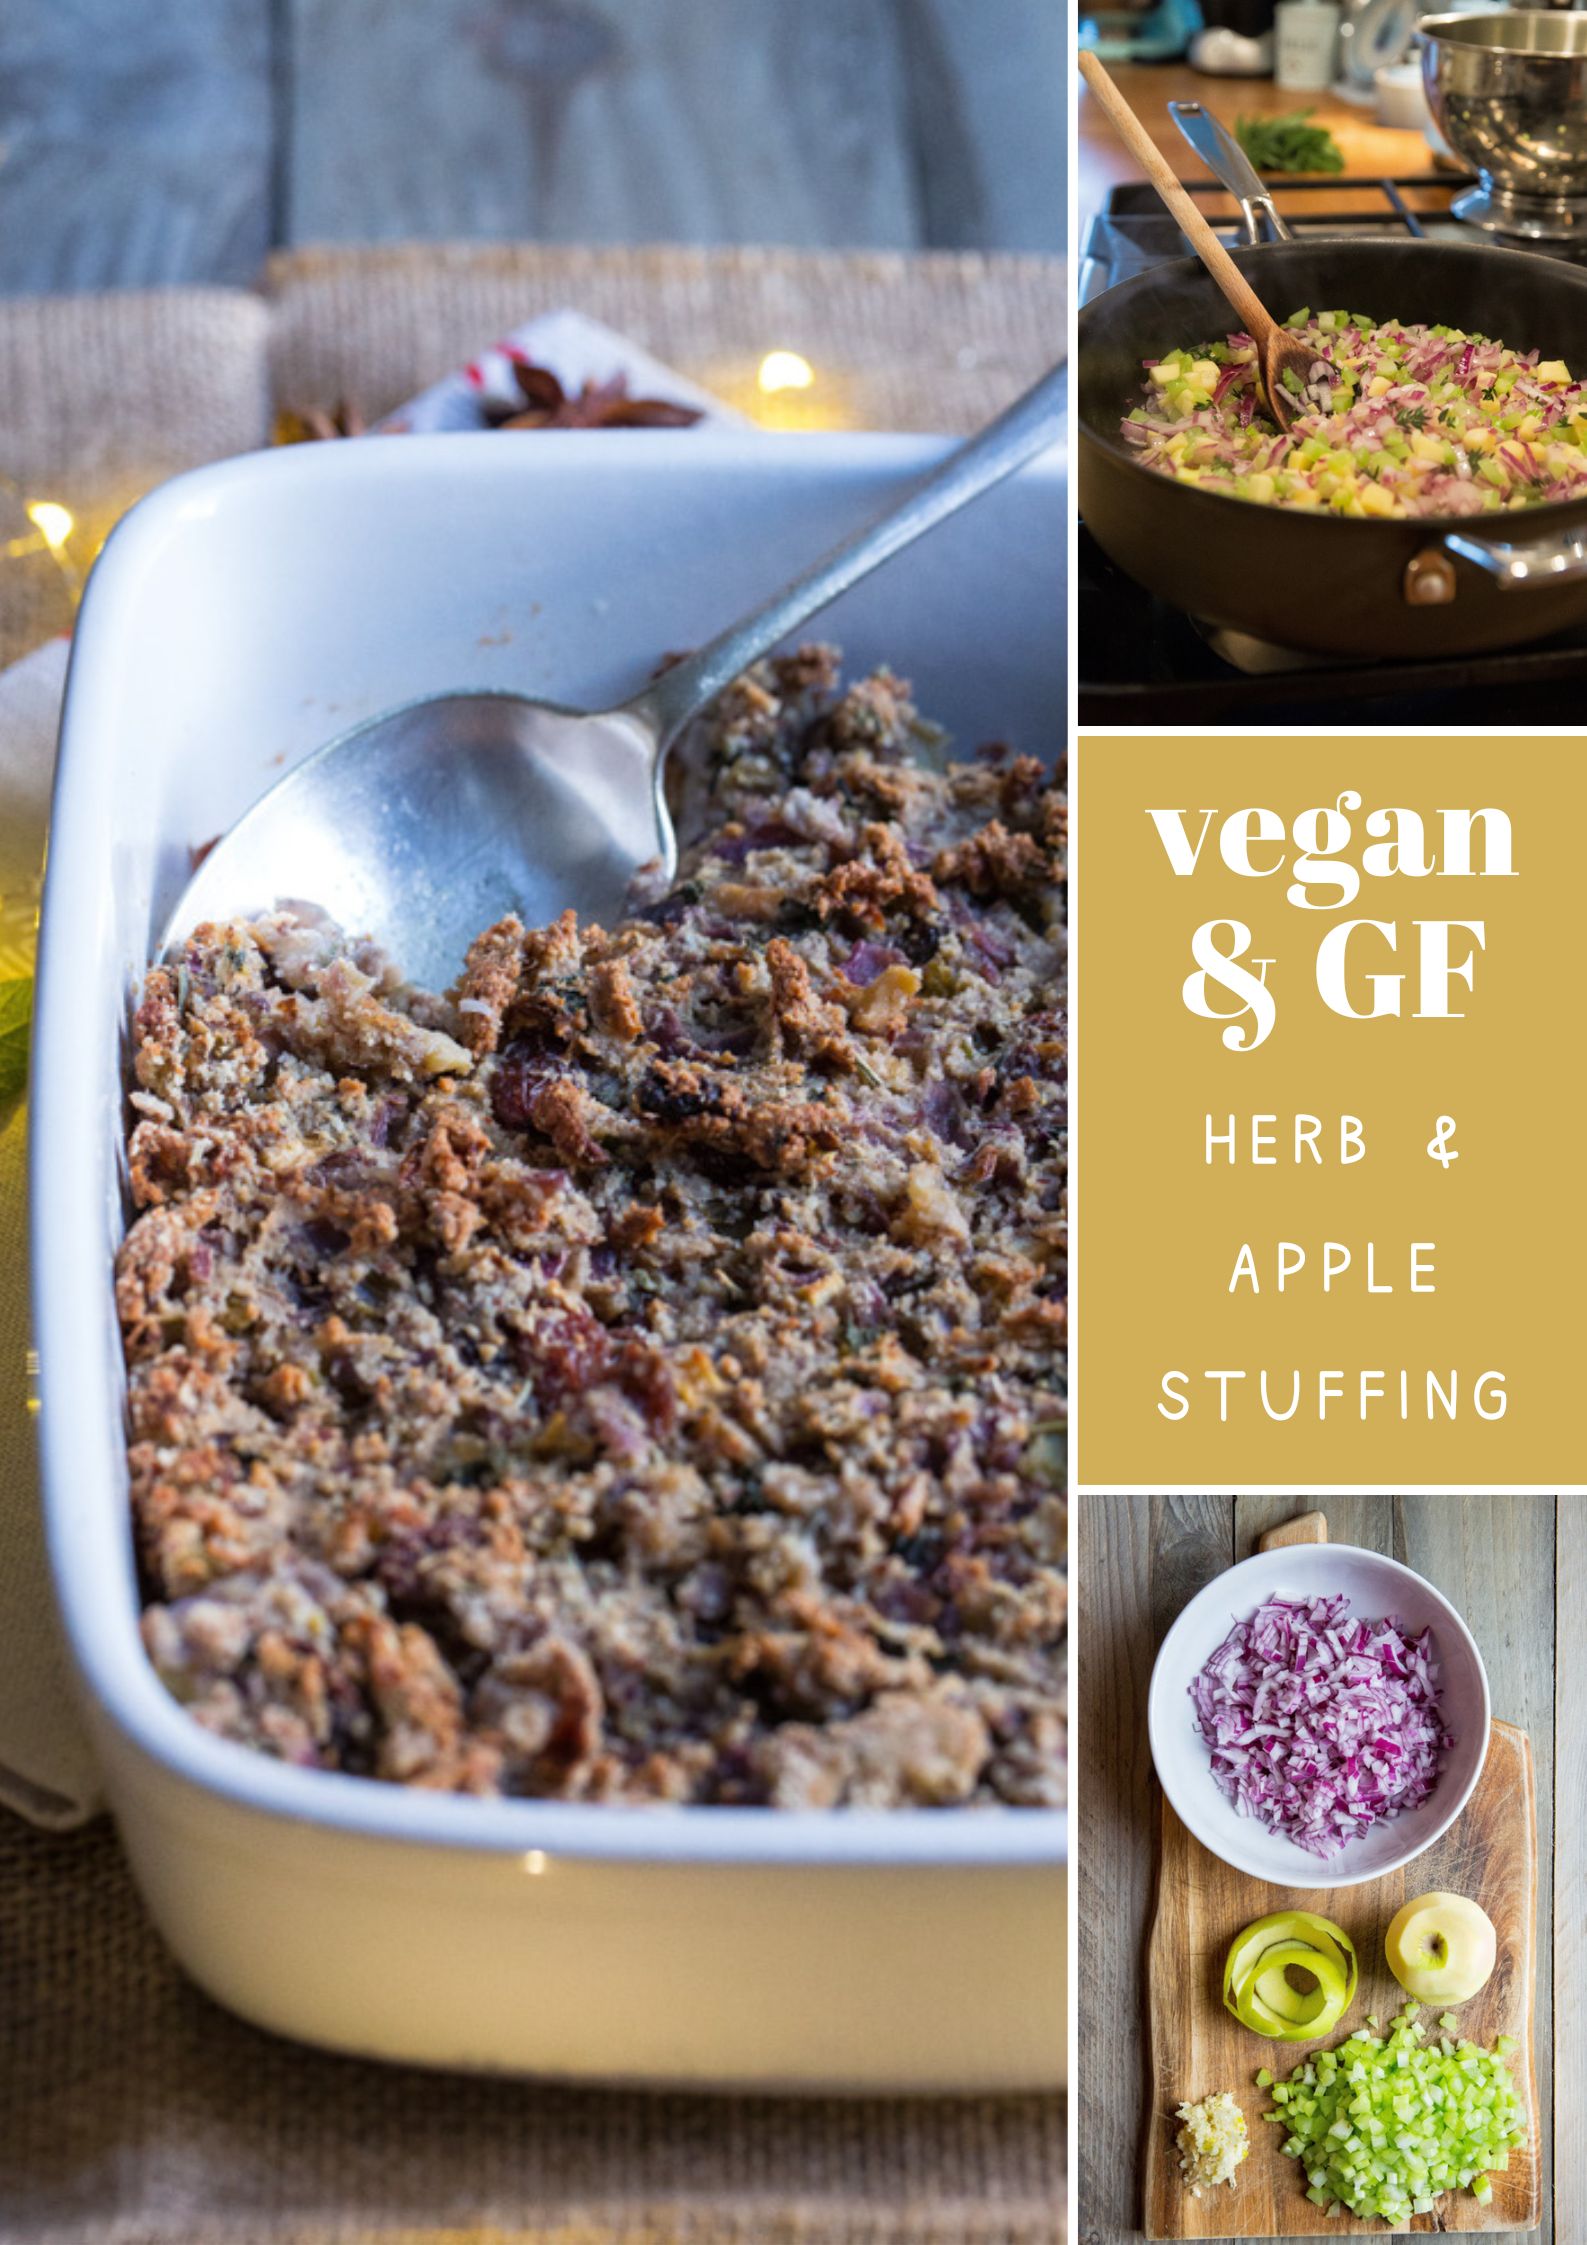 Vegan and gluten free stuffing packed with fruits, veggies, oats and flavour. Easily made in one pan or transfer to a baking dish for your festive table. The perfect accompaniment to a vegan Christmas, roast dinner or Thanksgiving feast! It also makes lovely addition to sandwiches cold and sliced the next day! Recipe on thecookandhim.com | #stuffing #veganstuffing #veganchristmasrecipes #glutenfreestuffing